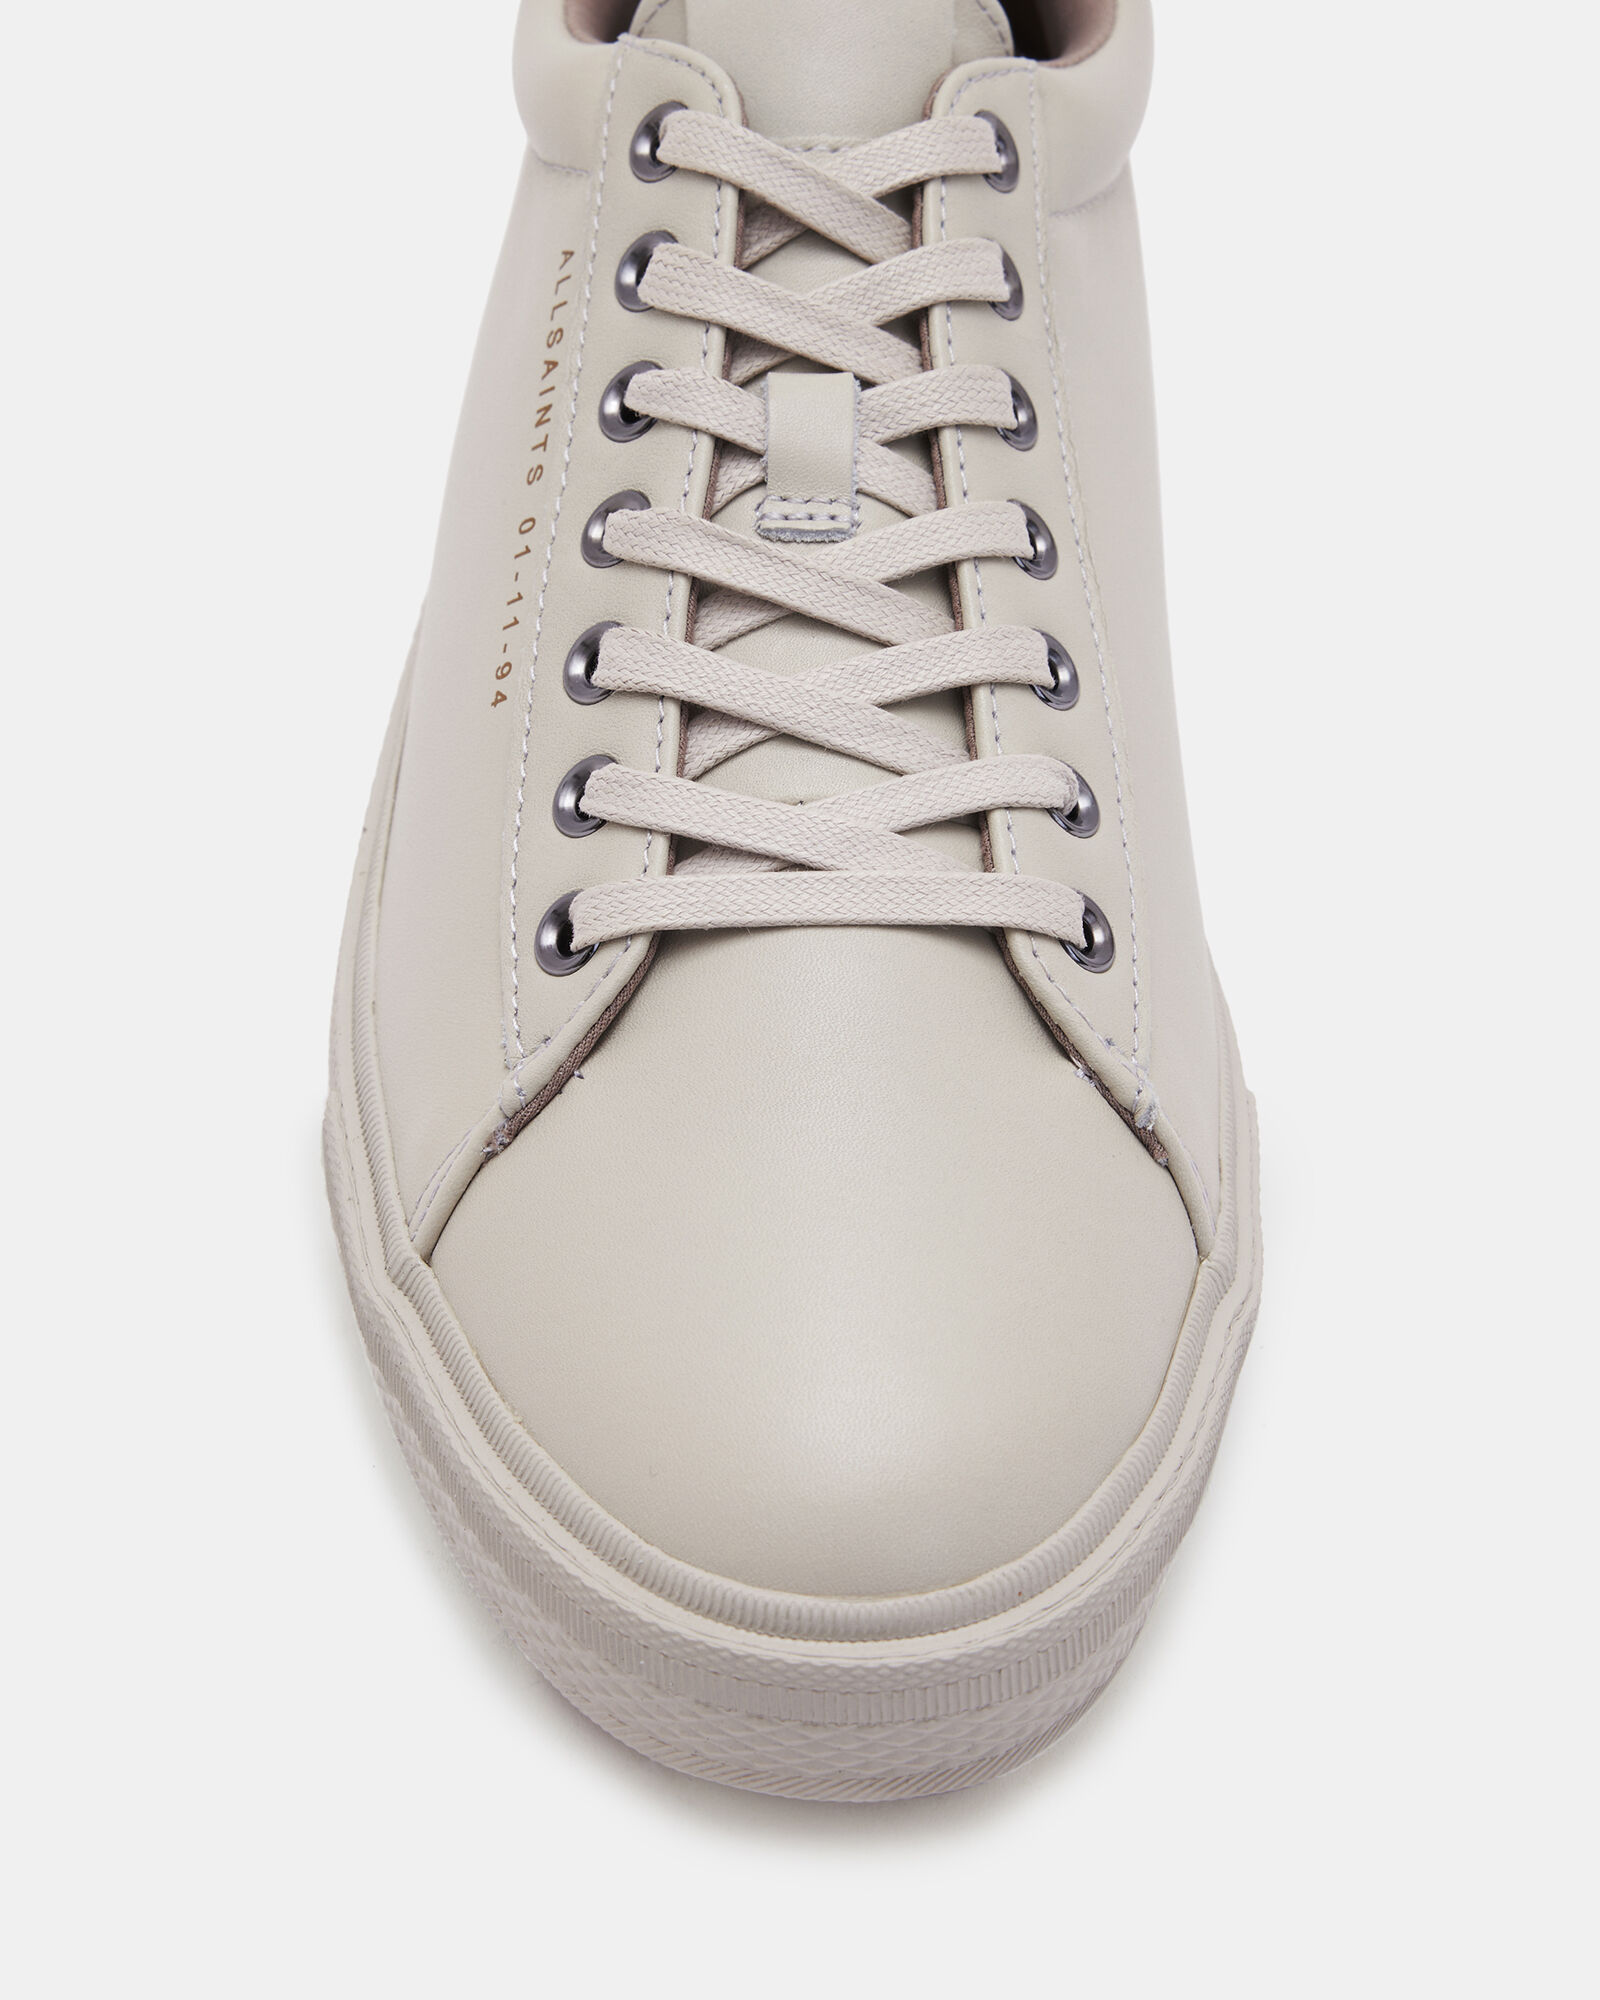 Brody Leather Low Top Trainers